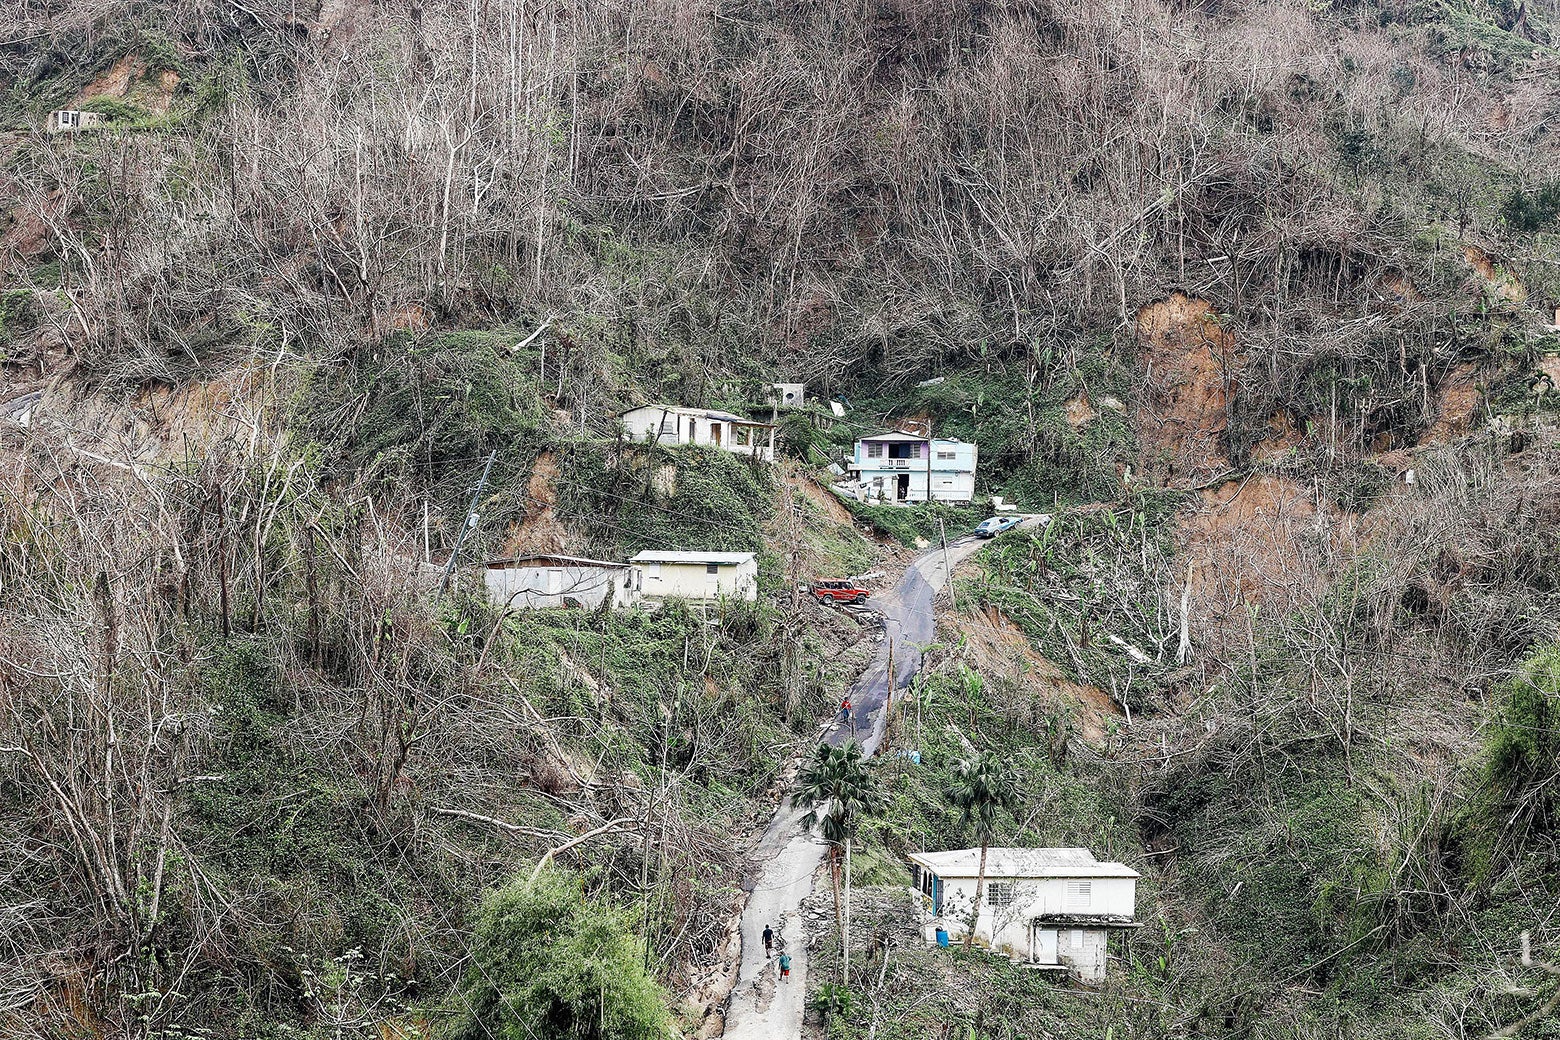 Community members walk on the street in a devastated section nearly three weeks after Hurricane Maria hit the island, on Oct. 10, 2017, in Pellejas, Adjuntas municipality, Puerto Rico.